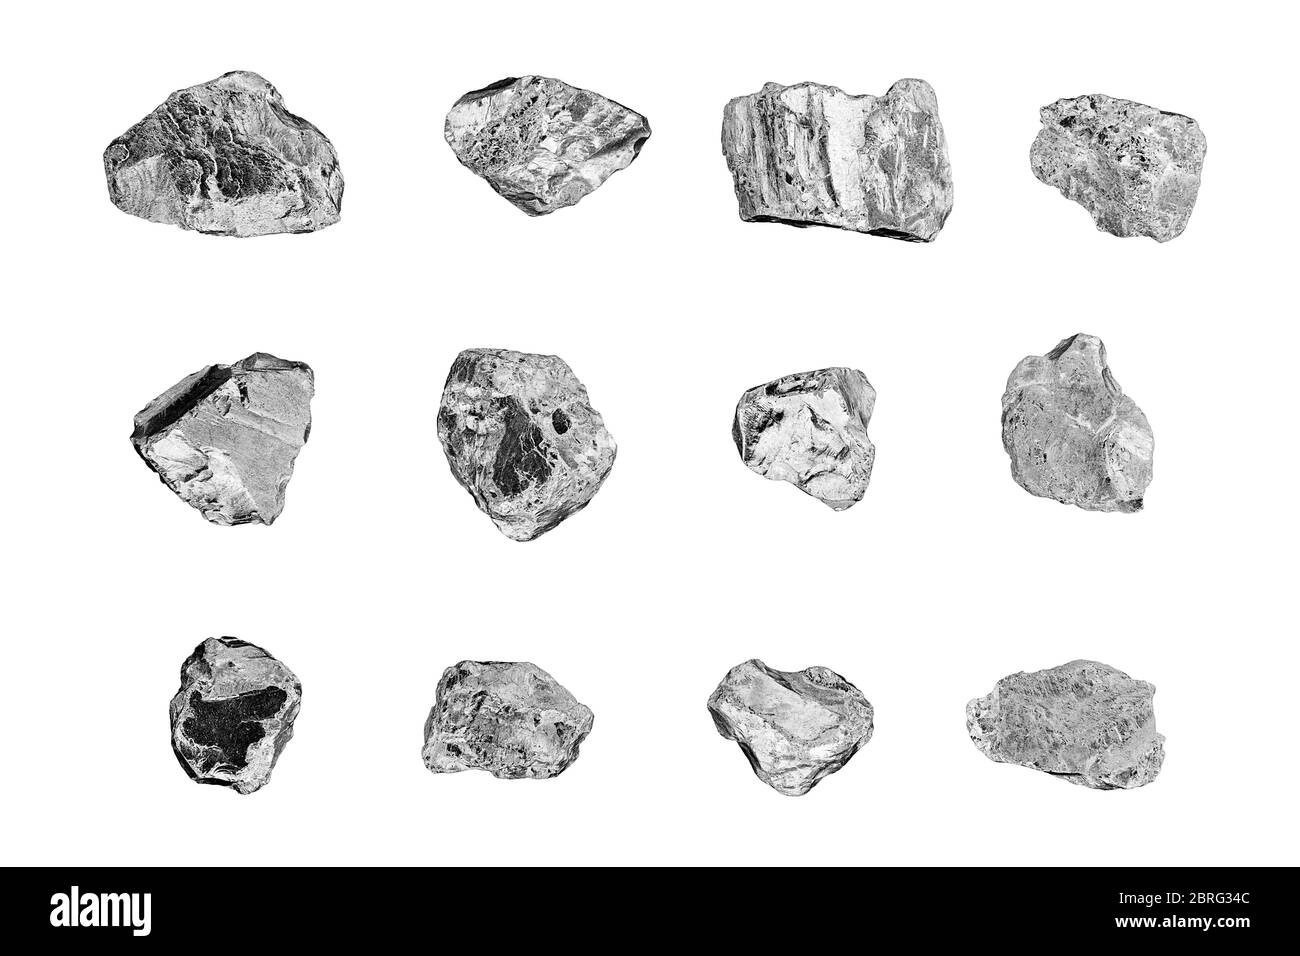 Silver stones set white background isolated closeup, iron mine nugget collection, gray metallic rock samples texture, metal ore pieces, rough rubbles Stock Photo